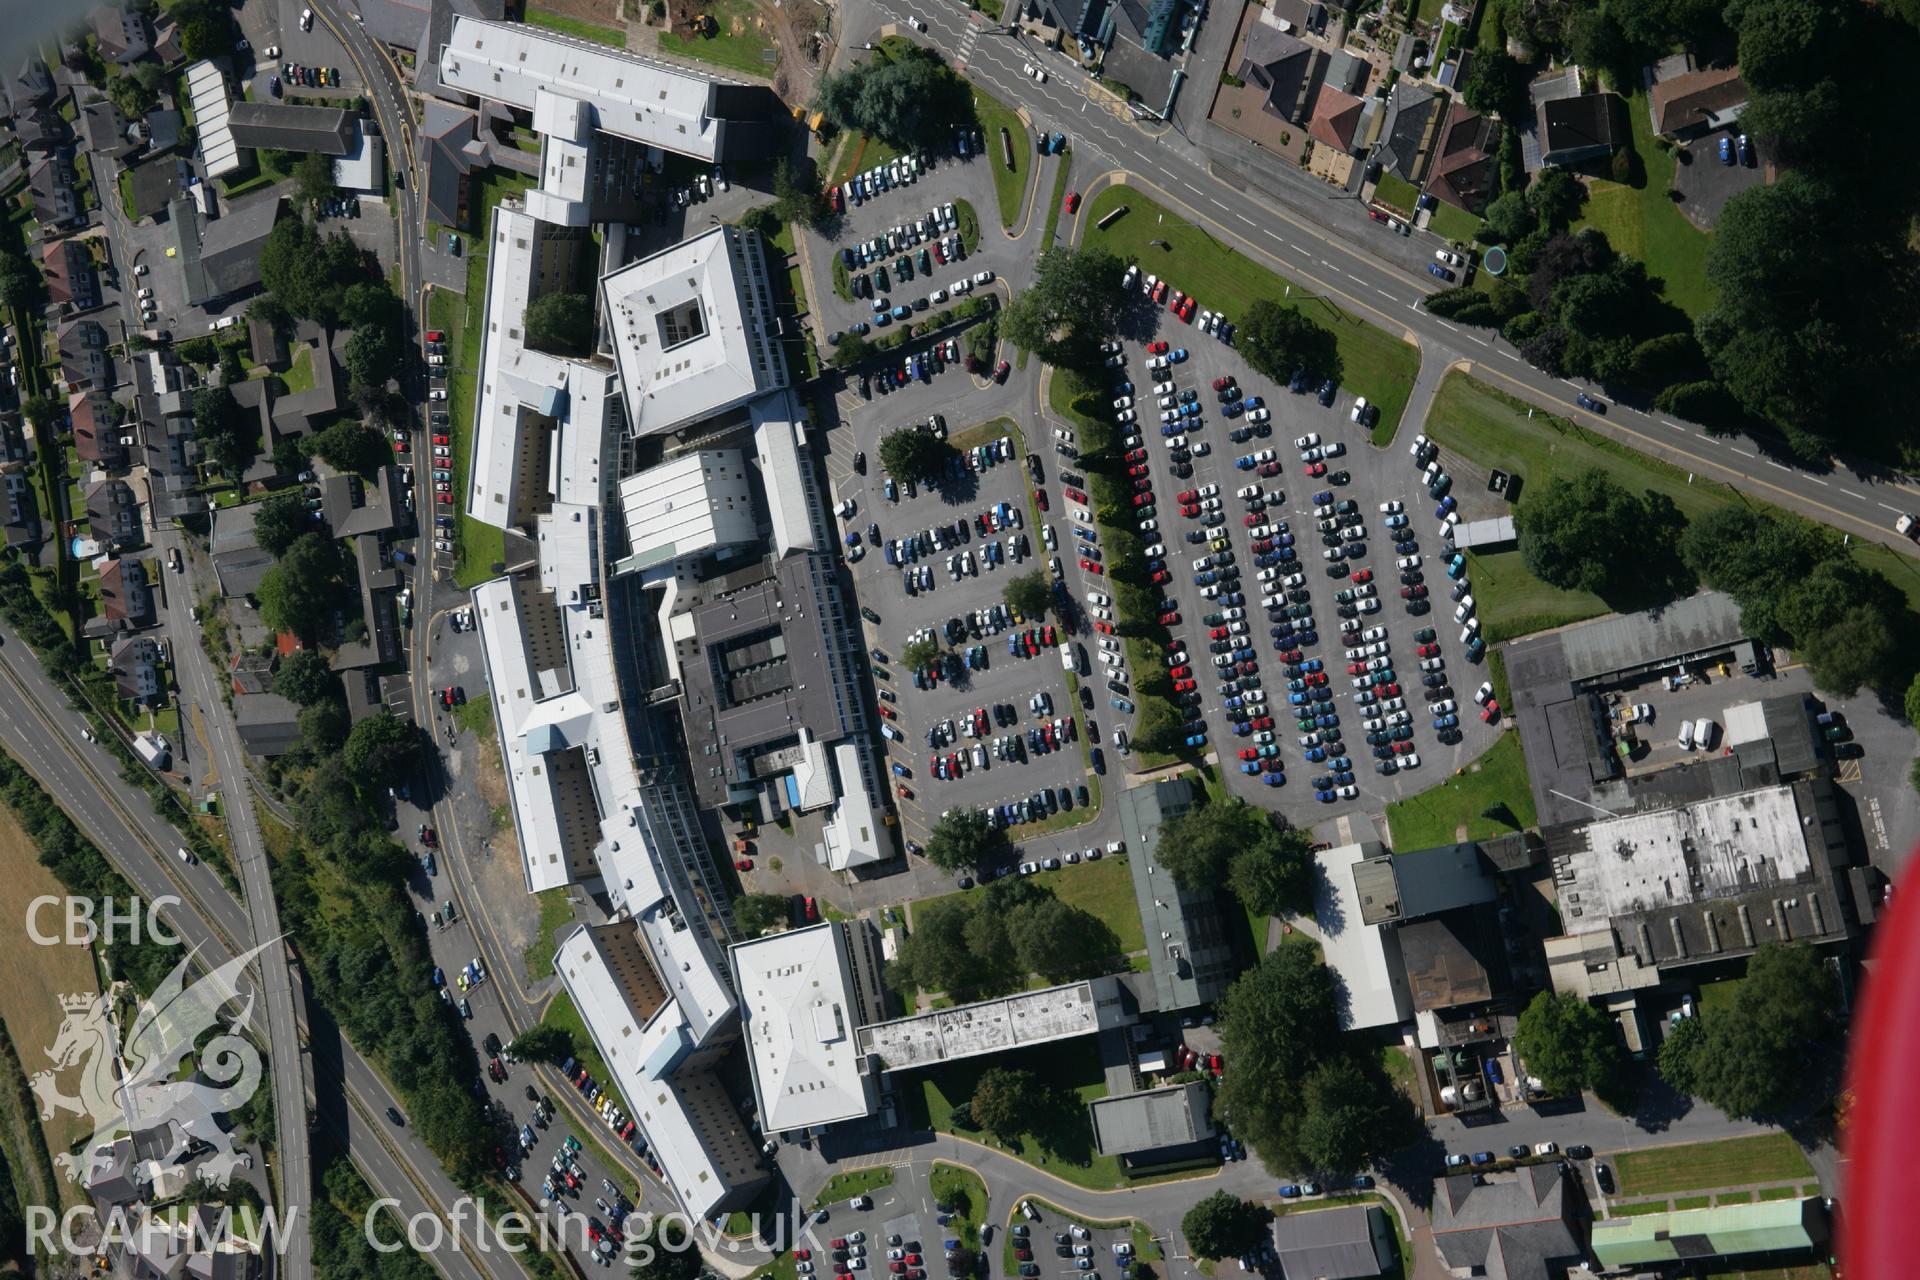 RCAHMW colour oblique aerial photograph of Carmarthen. Taken on 24 July 2006 by Toby Driver.